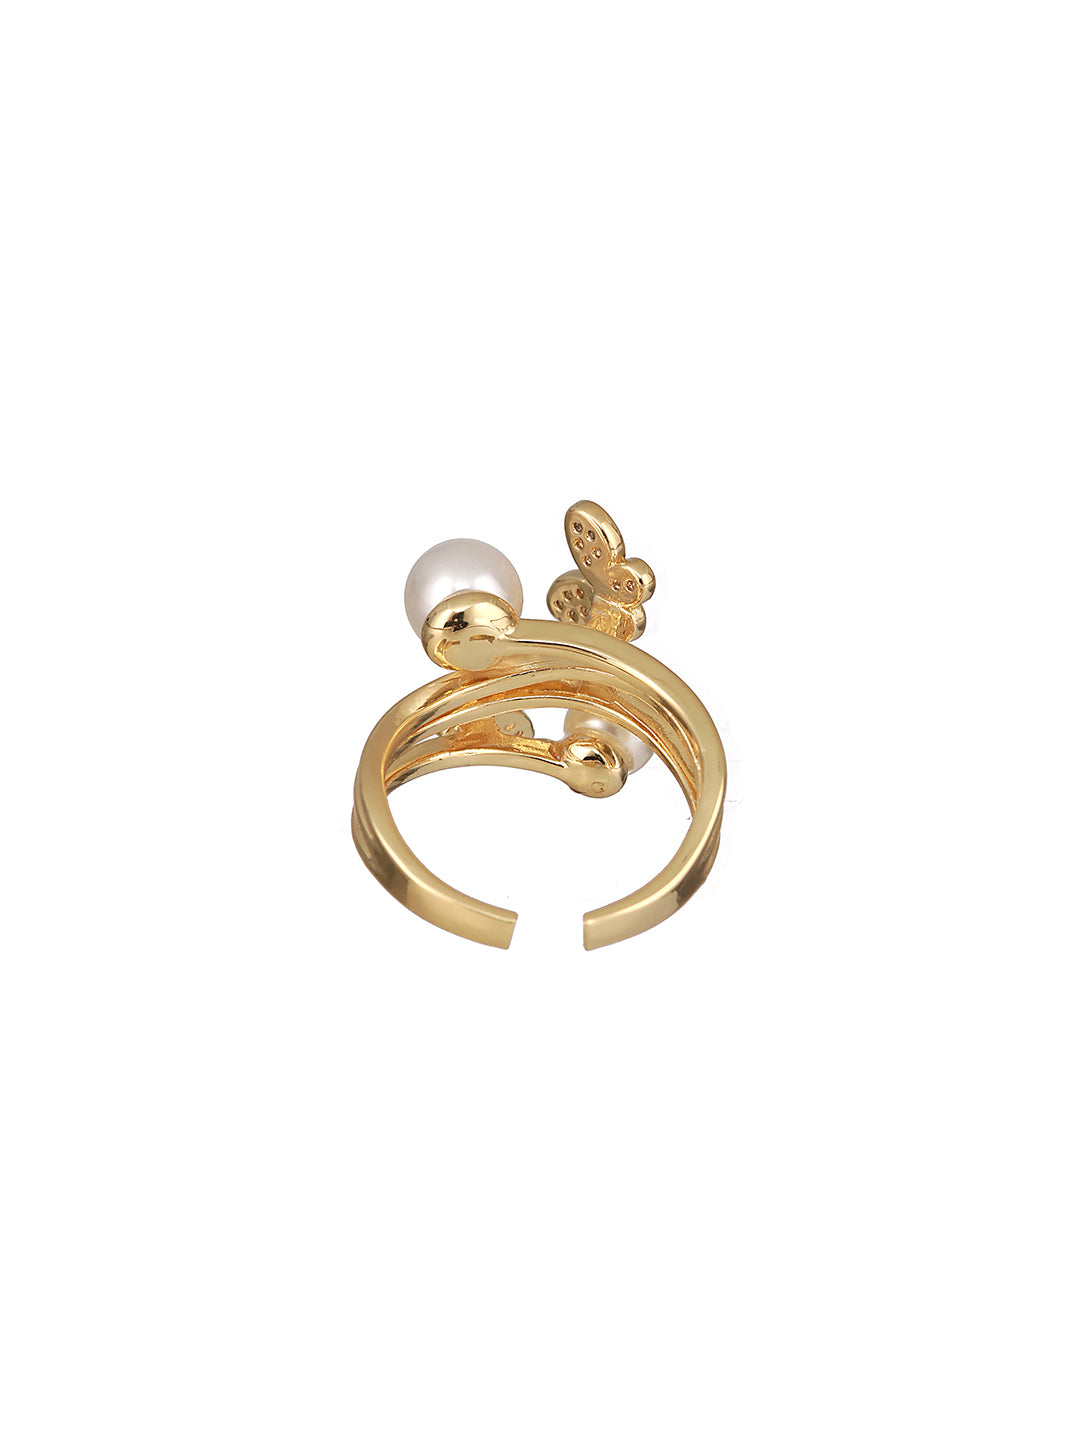 Gold-Plated Pearl-Studded Finger Ring